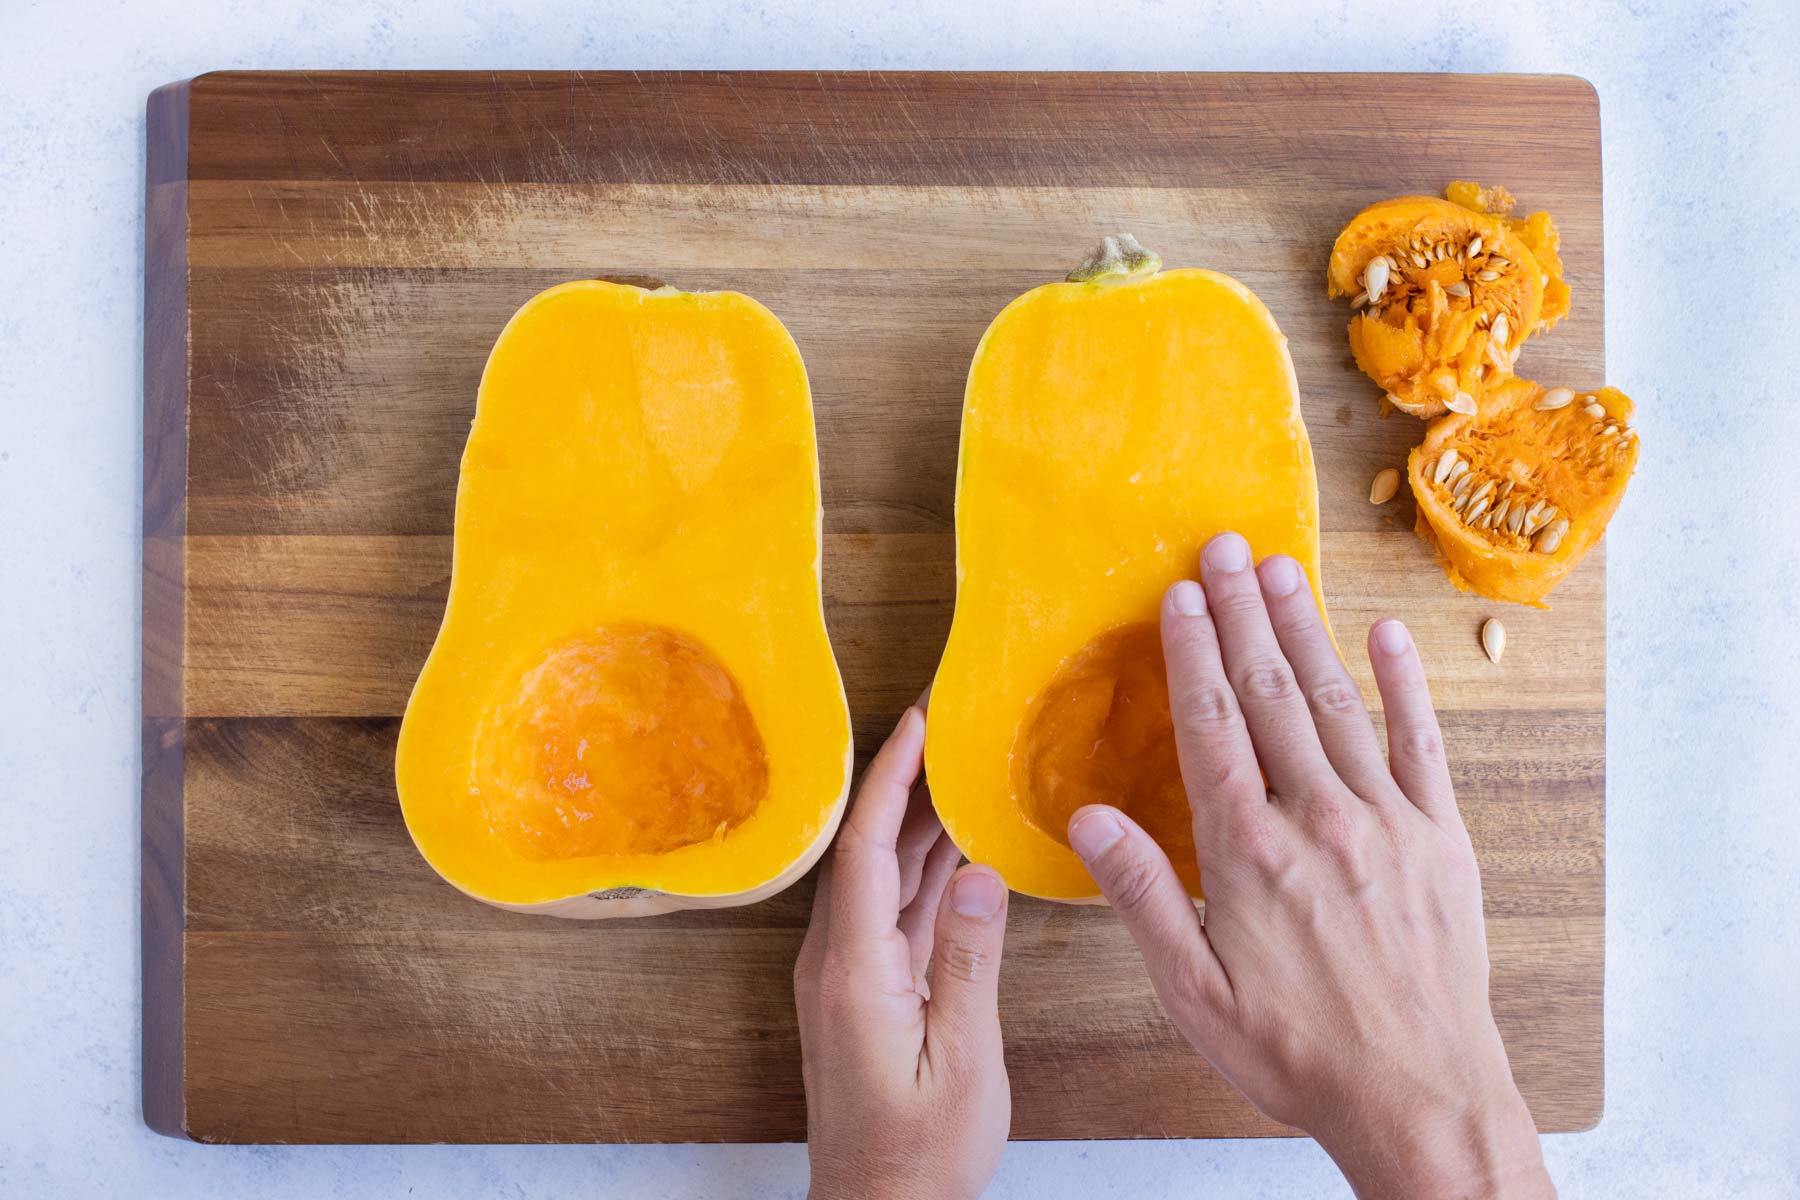 The butternut squash is covered in oil and salt.